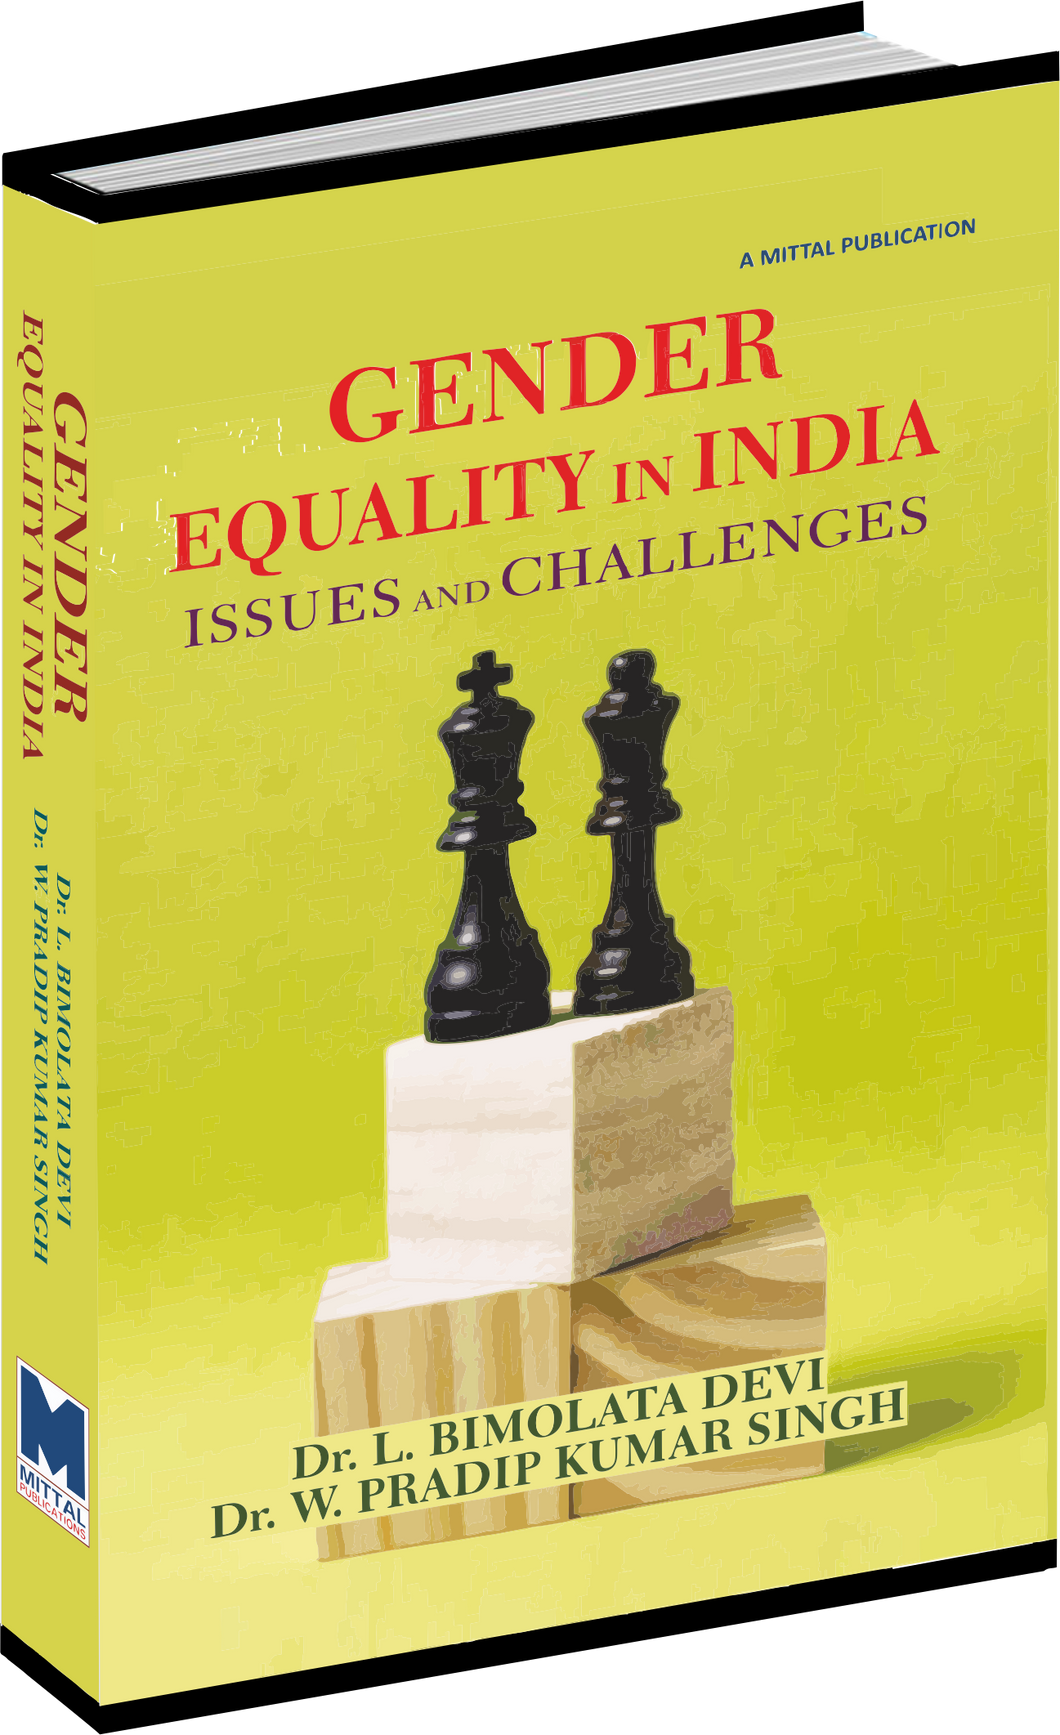 Gender Equality in India: Issues and Challengesb by L. Bimolata Devi & W. Pradip Kumar Singh